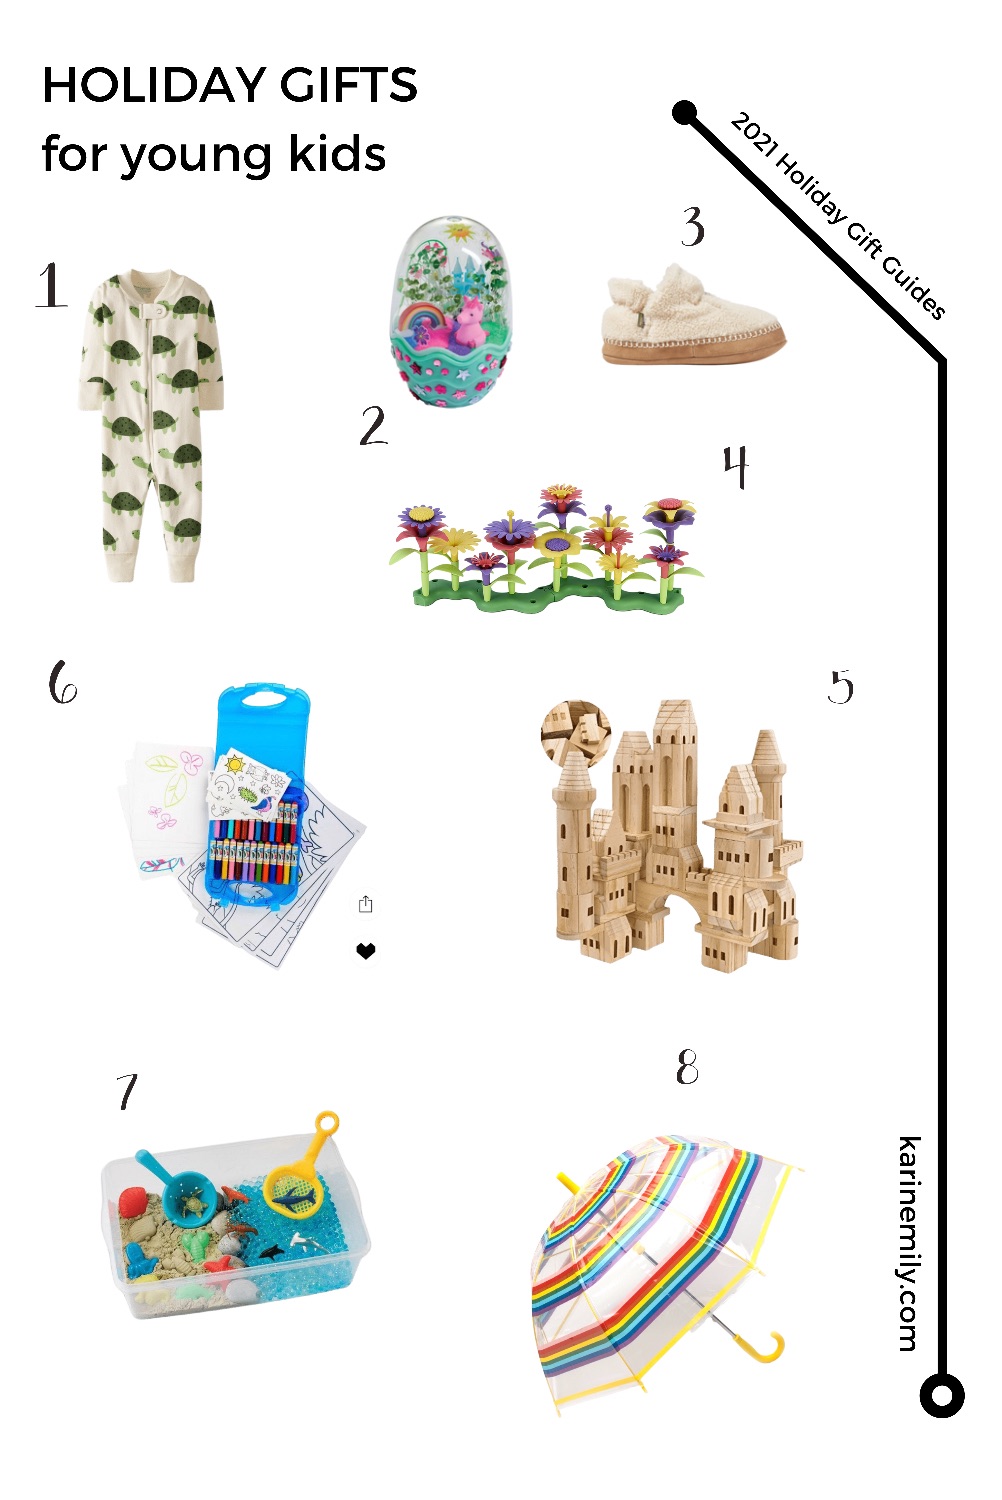 Karin Emily shares her 2021 Holiday Gift Guides for Kids